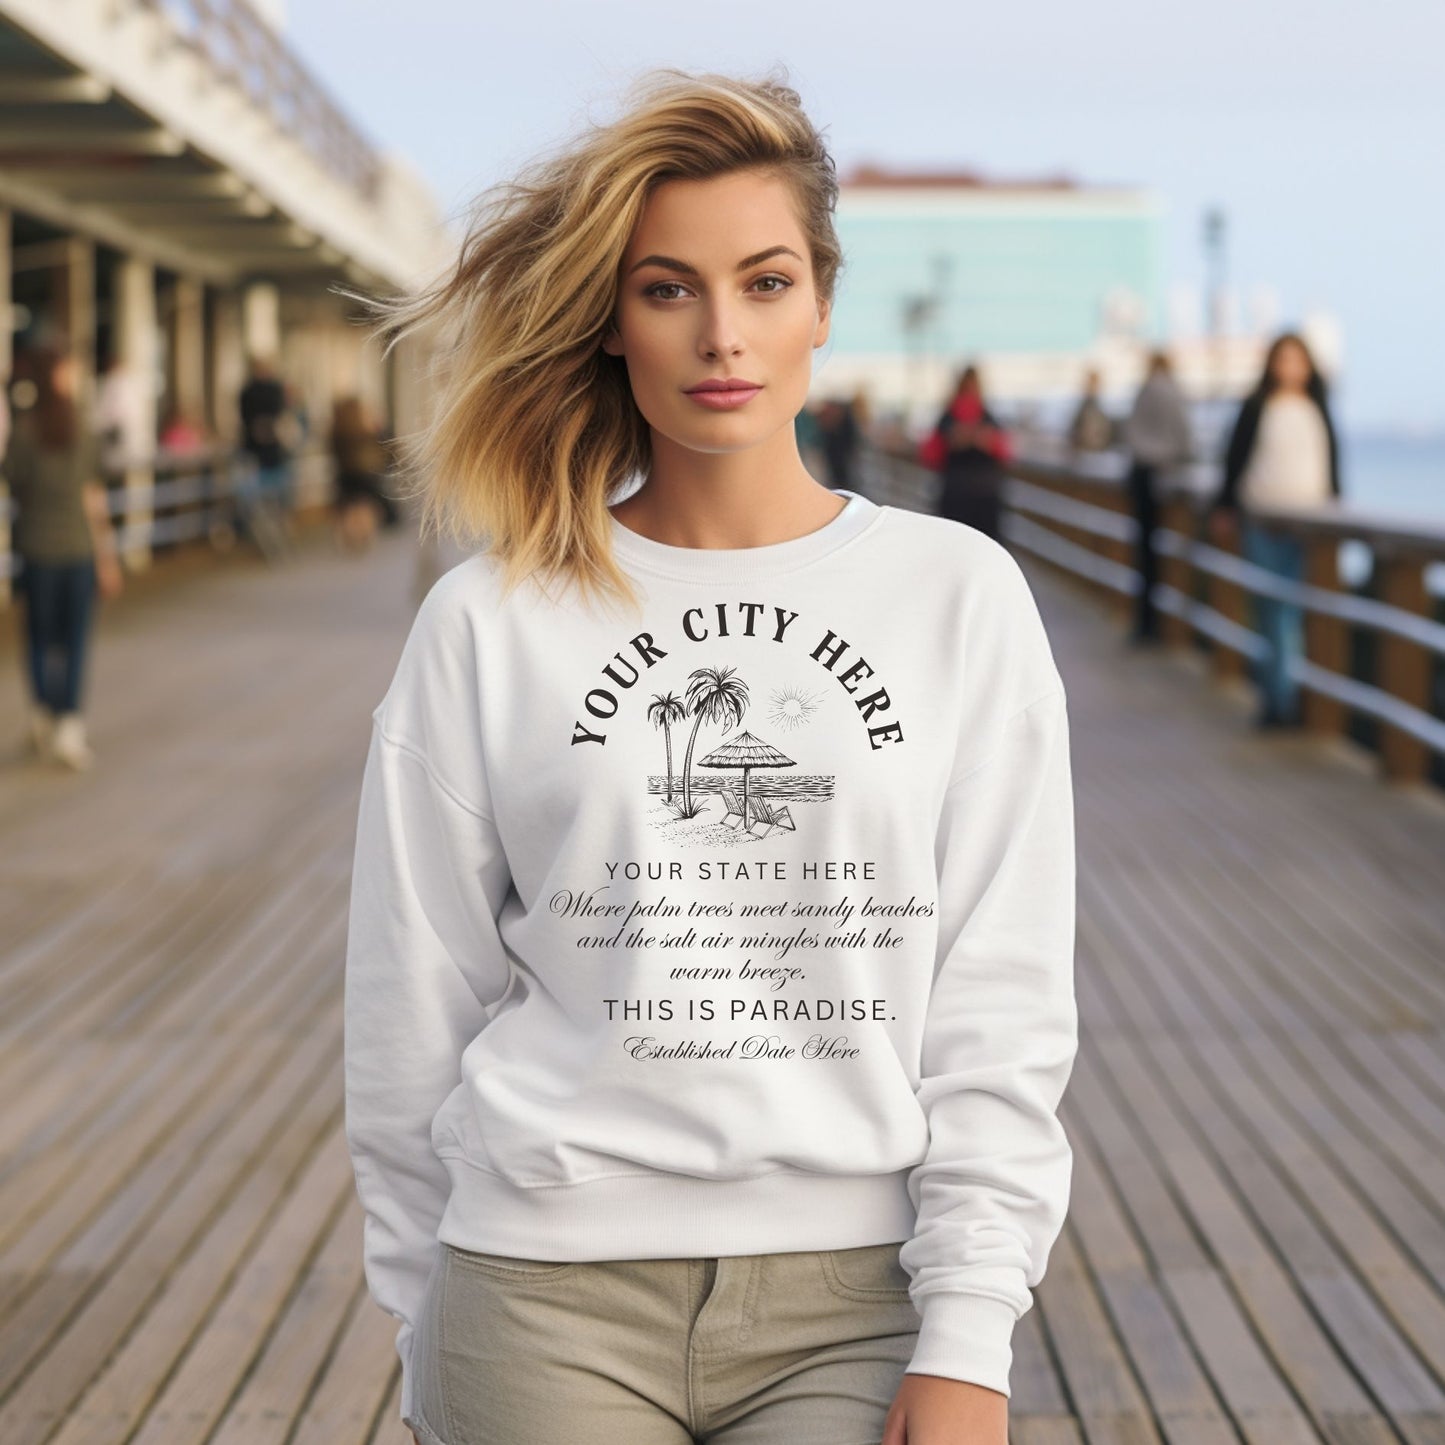 This is Paradise Sweatshirt - Customize With Your City